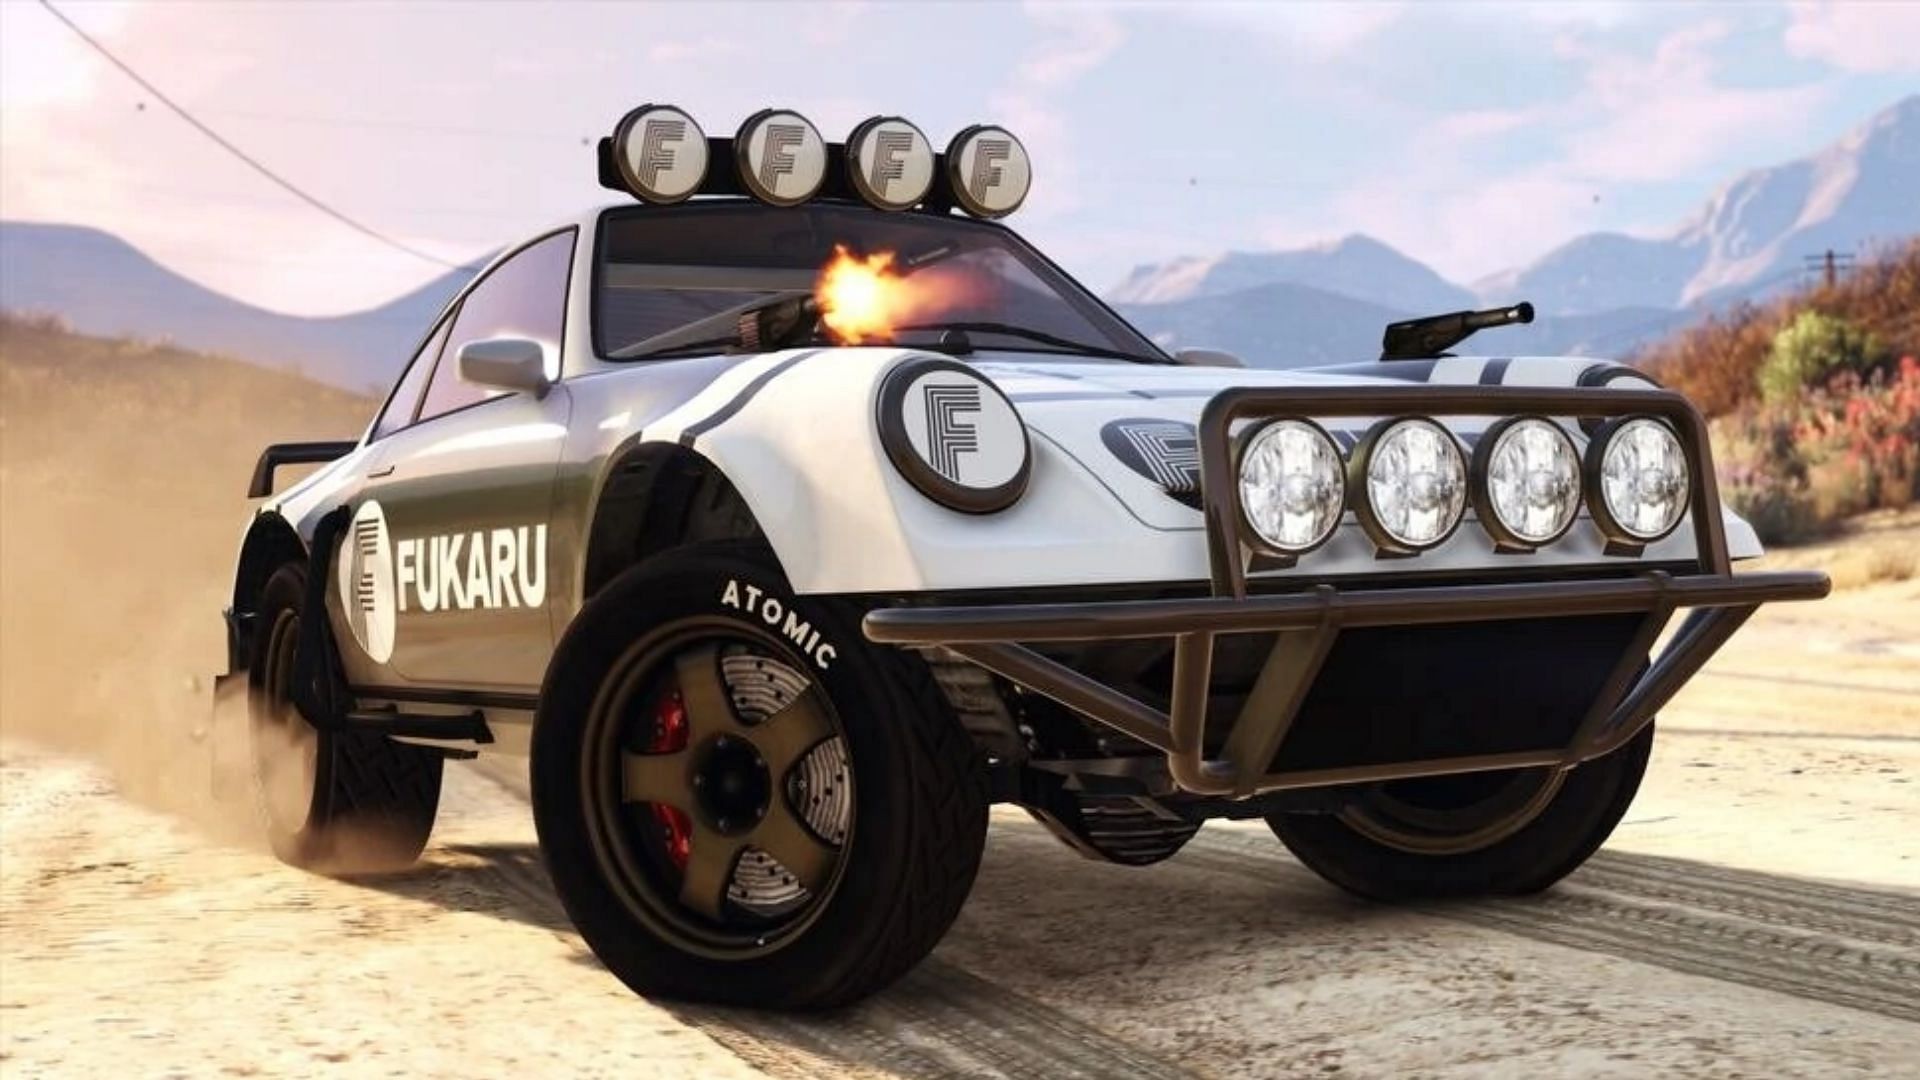 The Comet Safari is one of the vehicles on sale this week